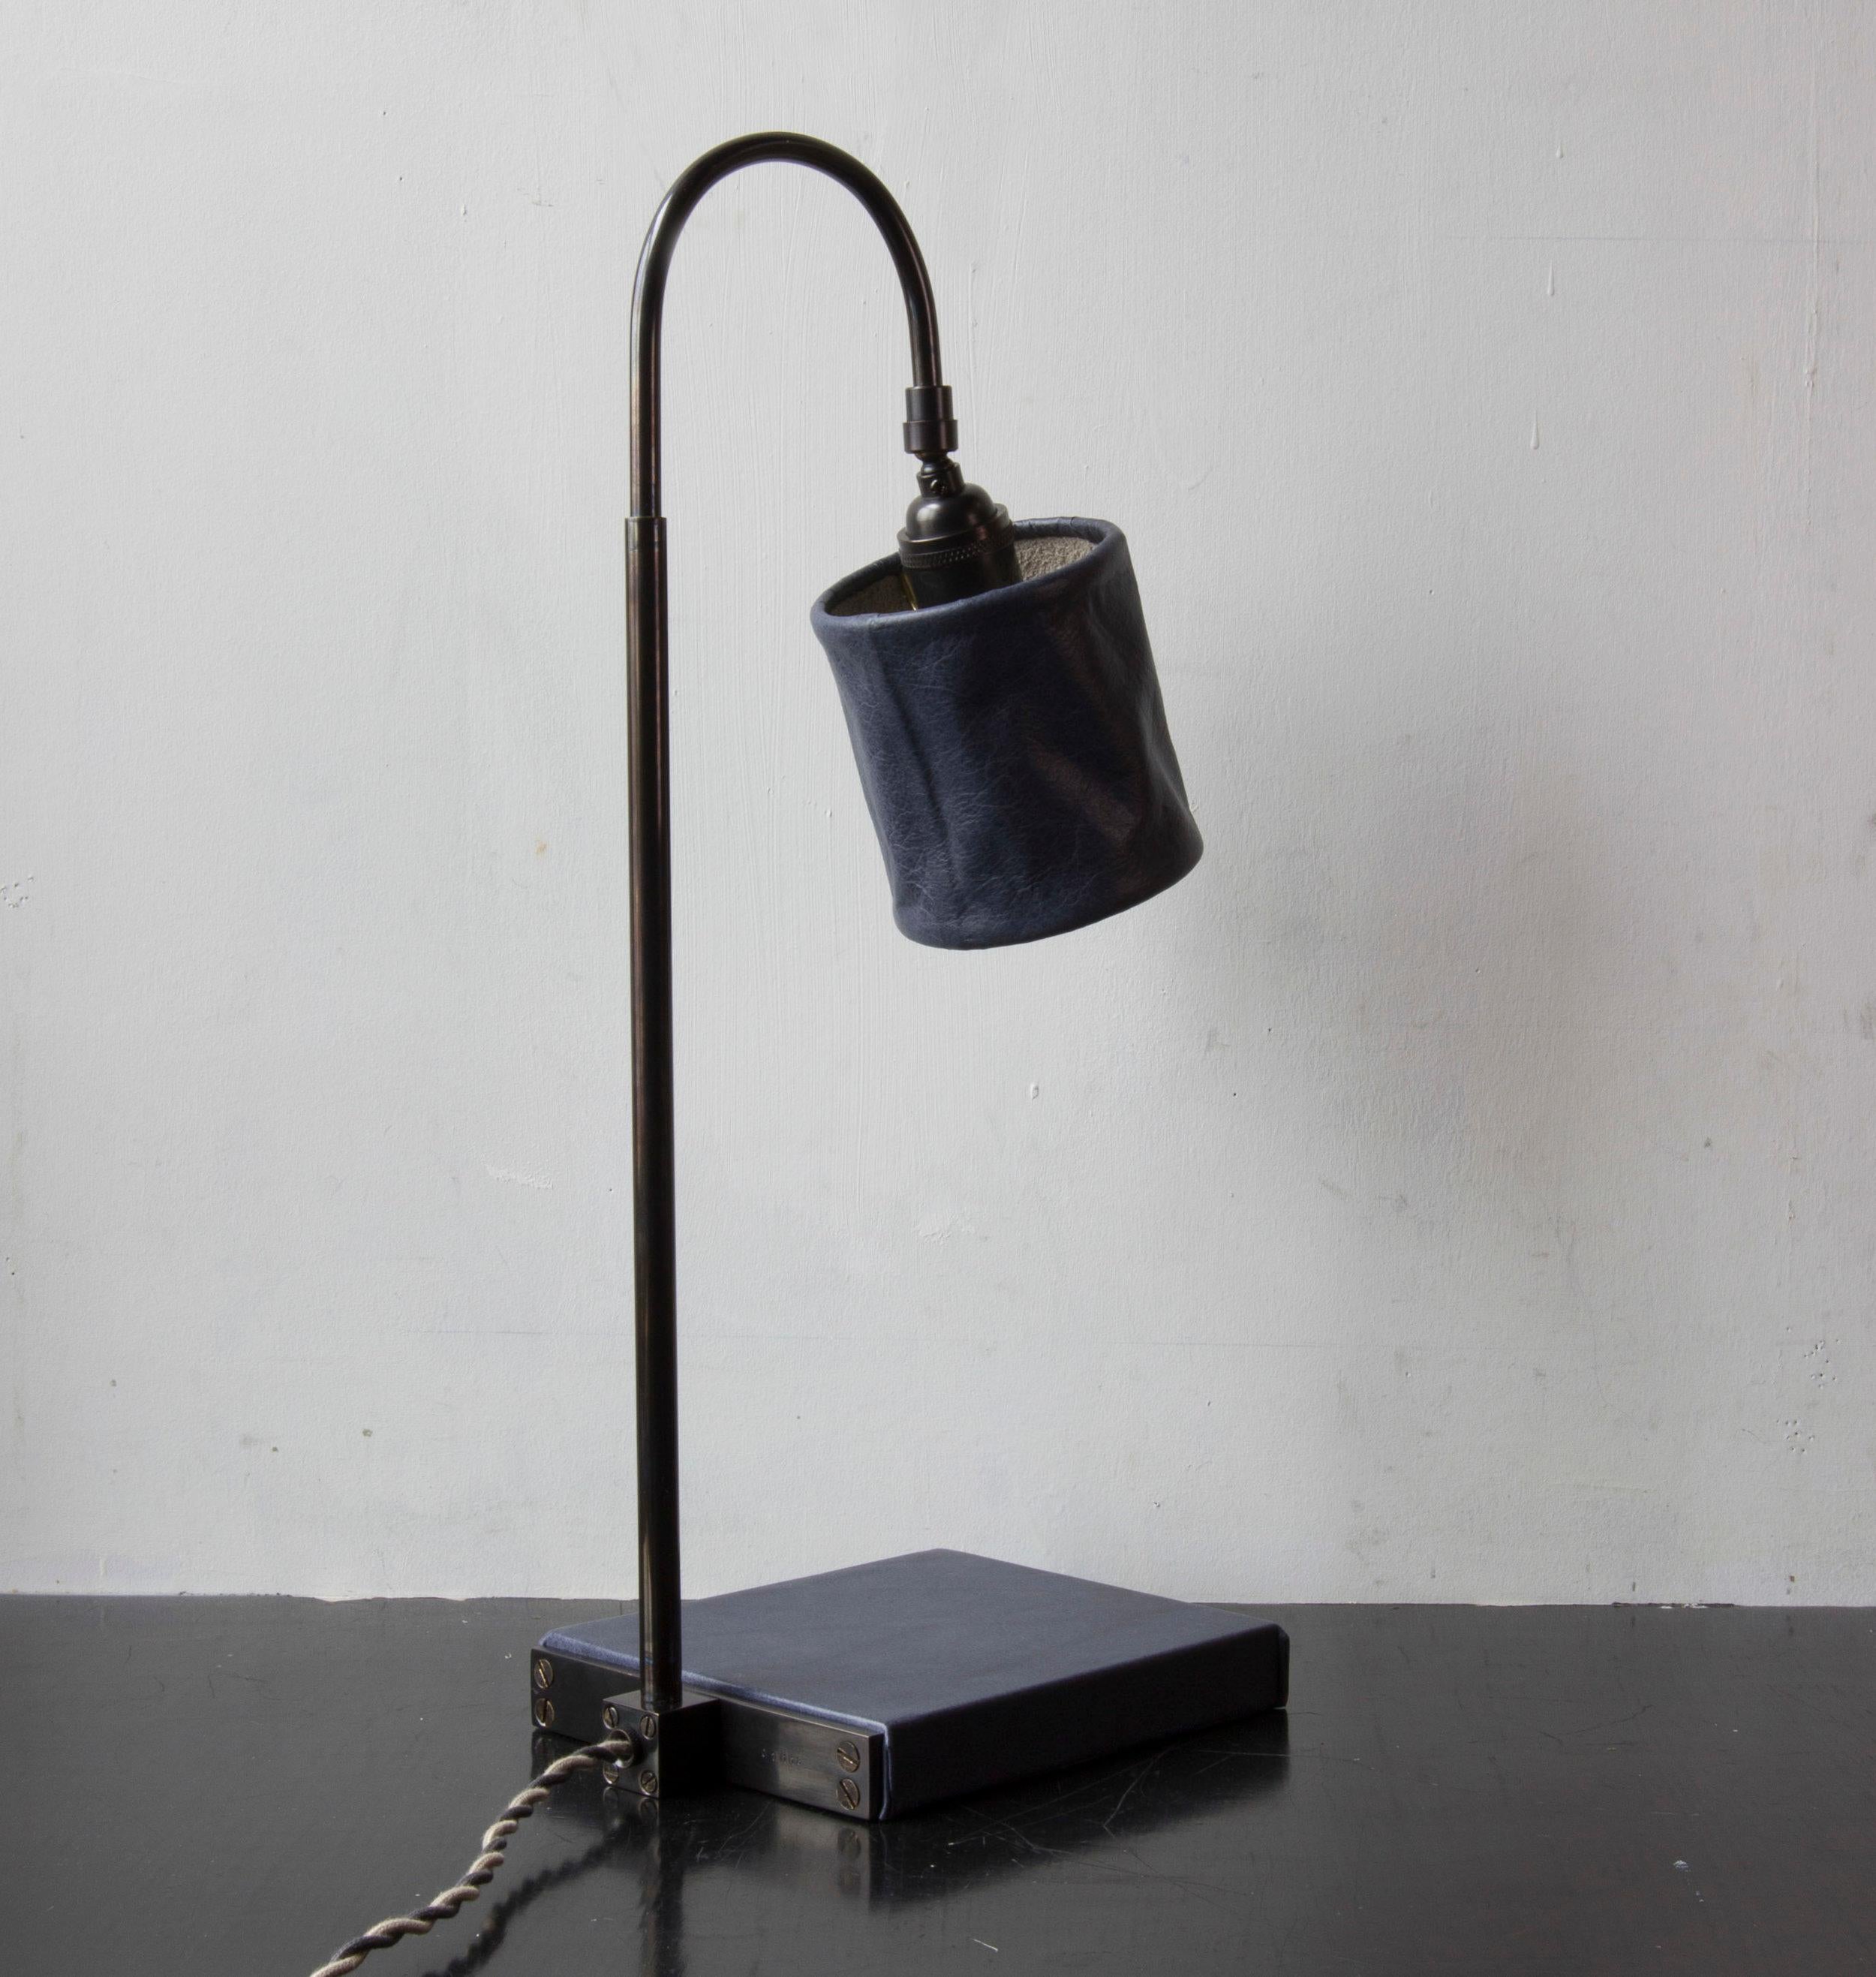 Solid machined brass in dark patinated brass finish, hand-dyed and waxed leather wrapped wood, soft unstructured pivoting leather shade, hand-dyed braided cotton cord. All material finishes are living finishes: they will change and patina for the